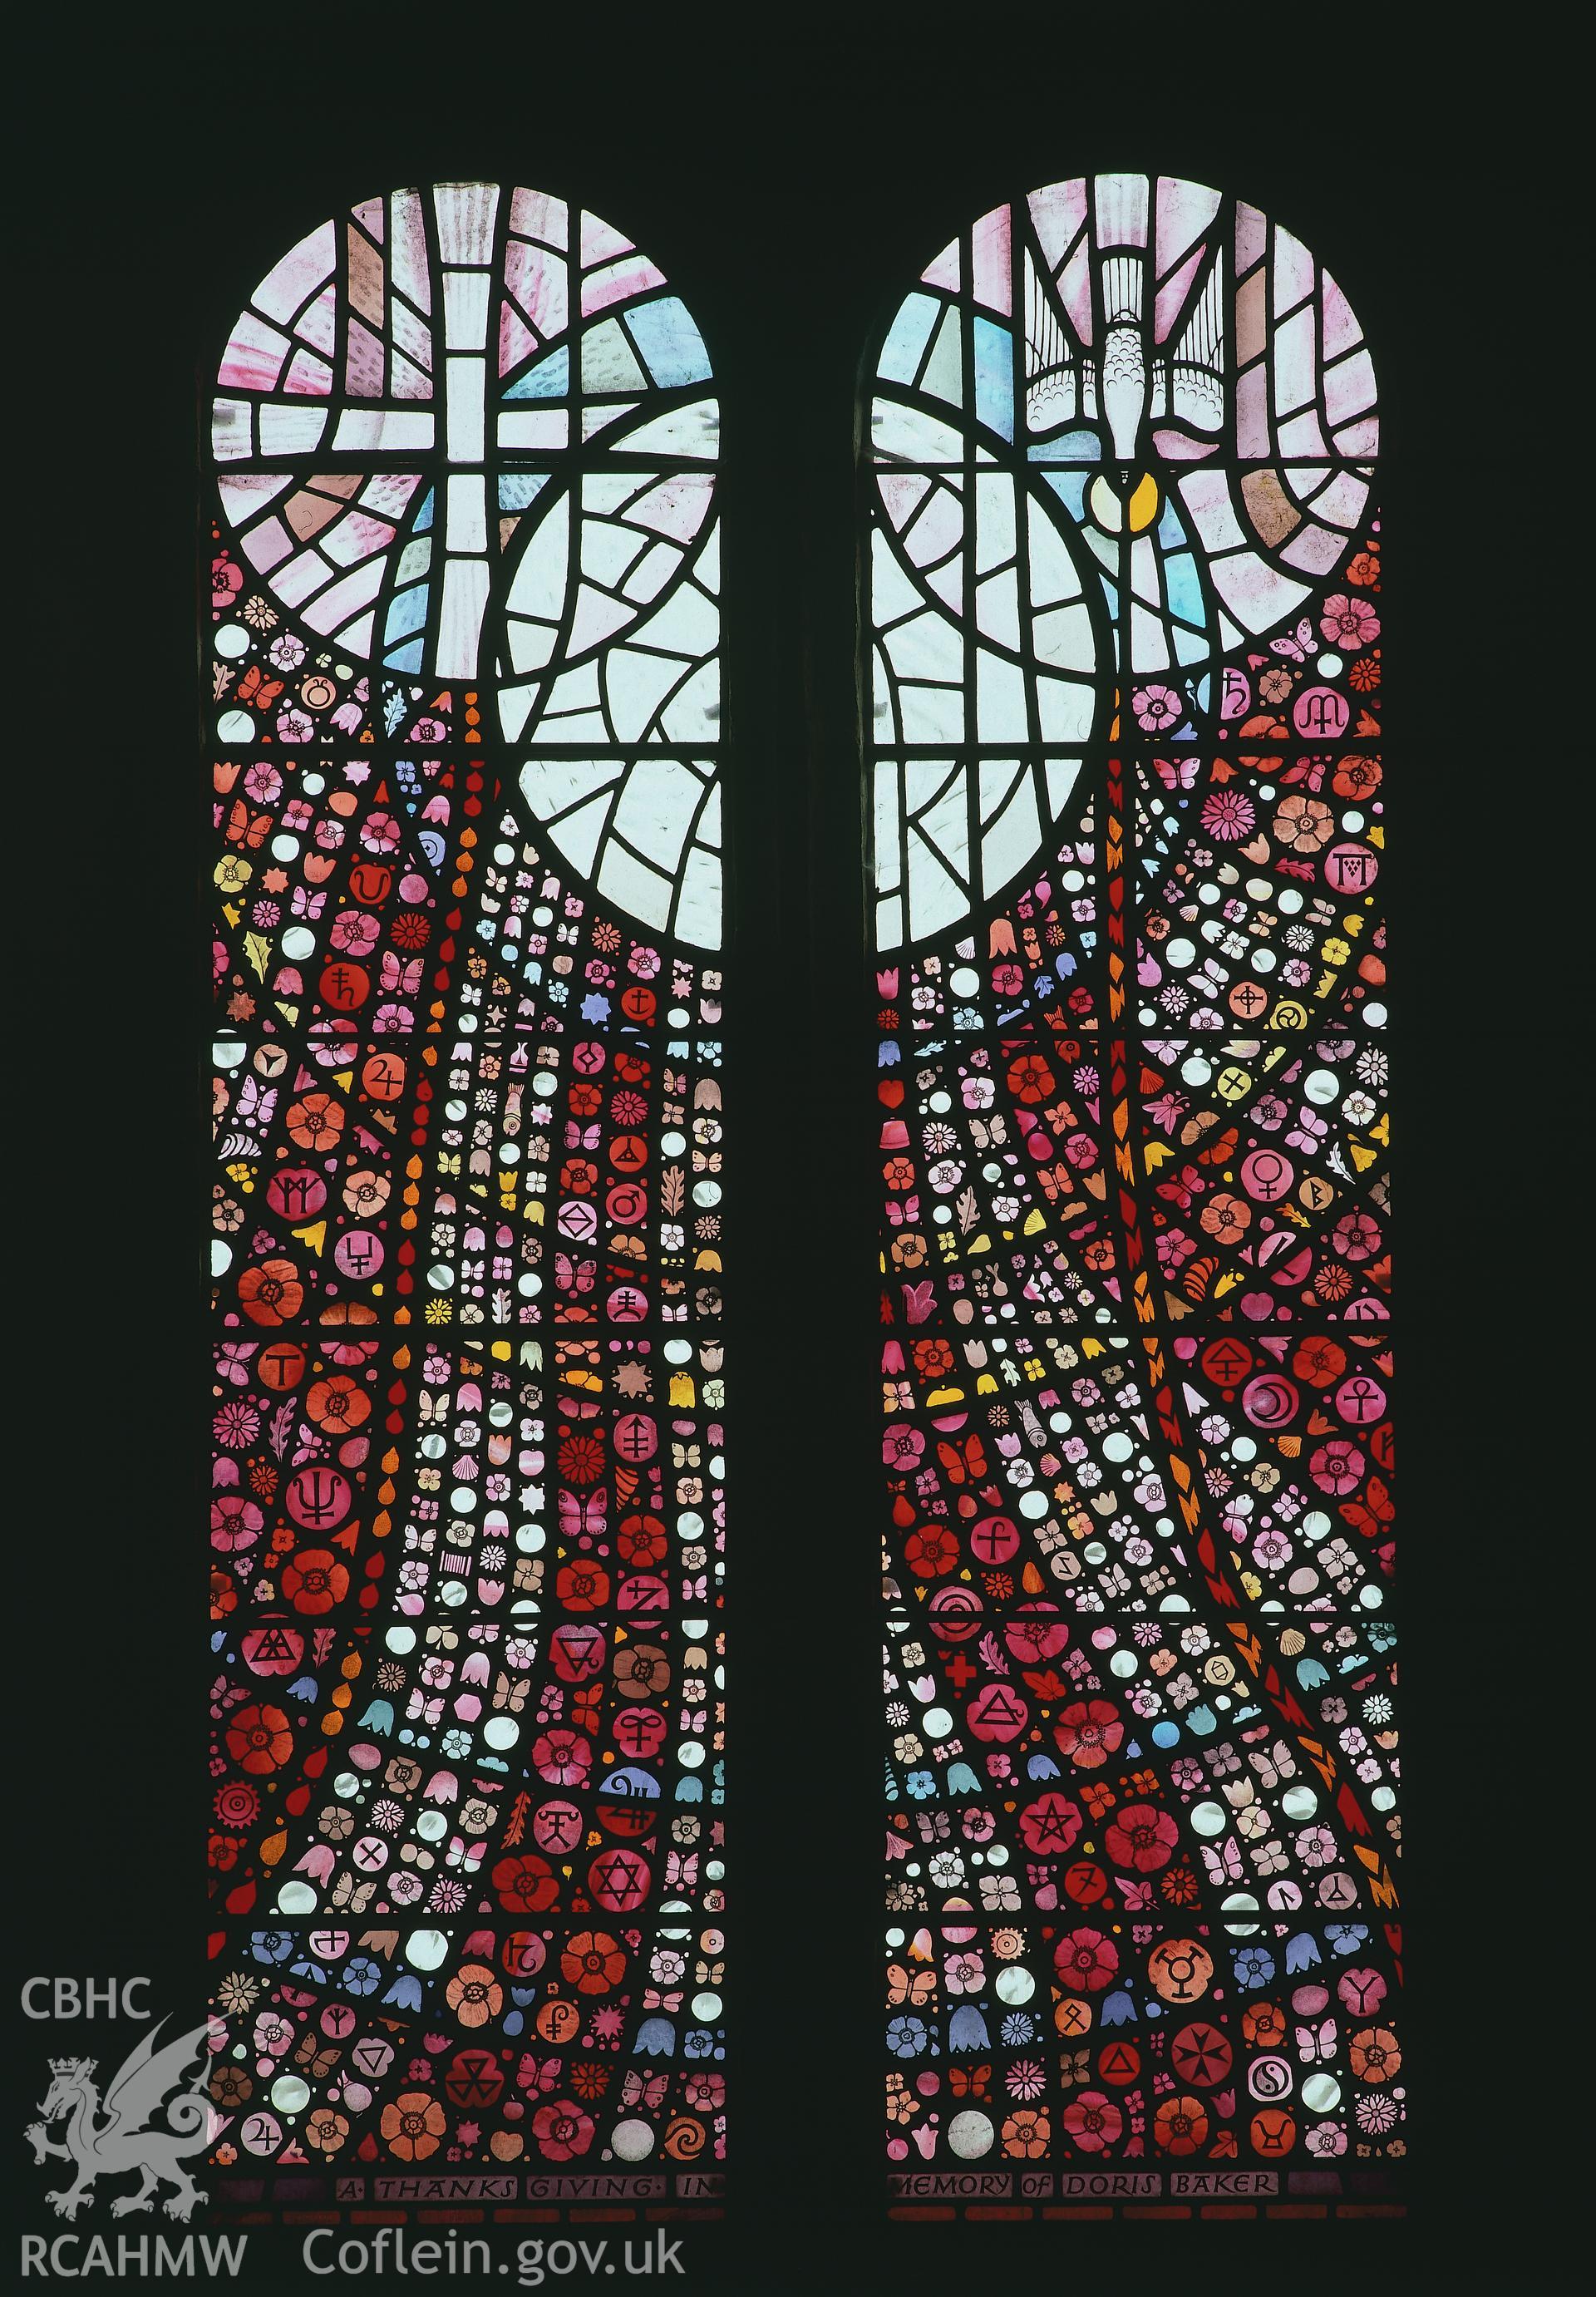 RCAHMW colour transparency showing view of stained glass window at St Stephen's Church, Llanstephan